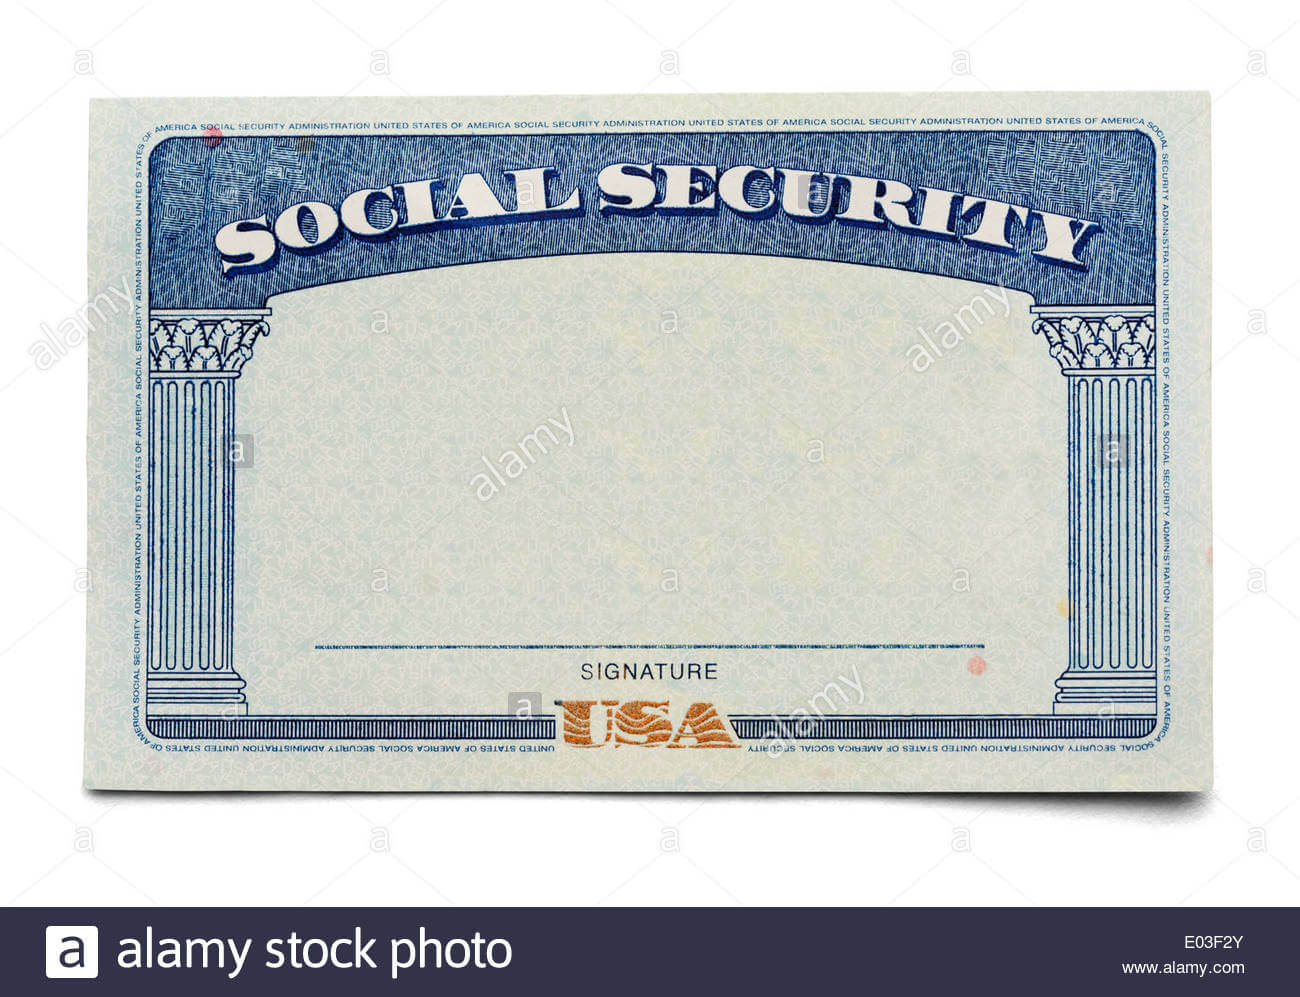 Social Security Stock Photos & Social Security Stock Images With Fake Social Security Card Template Download